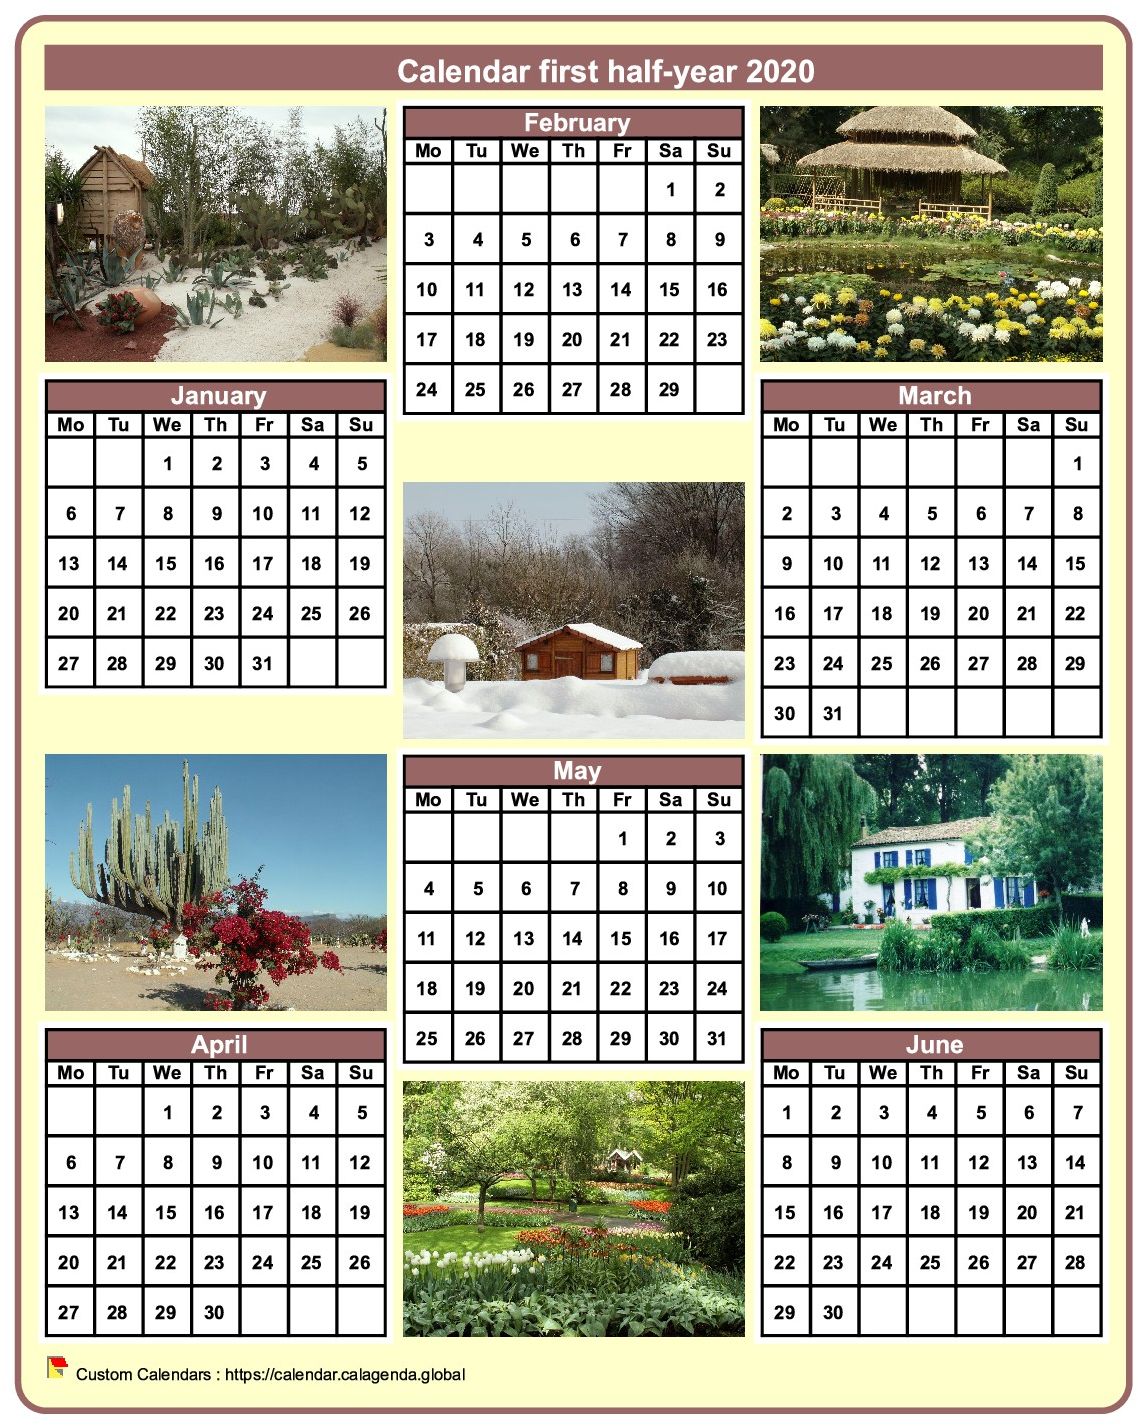 Calendar 2020 half-year with a different photo every month